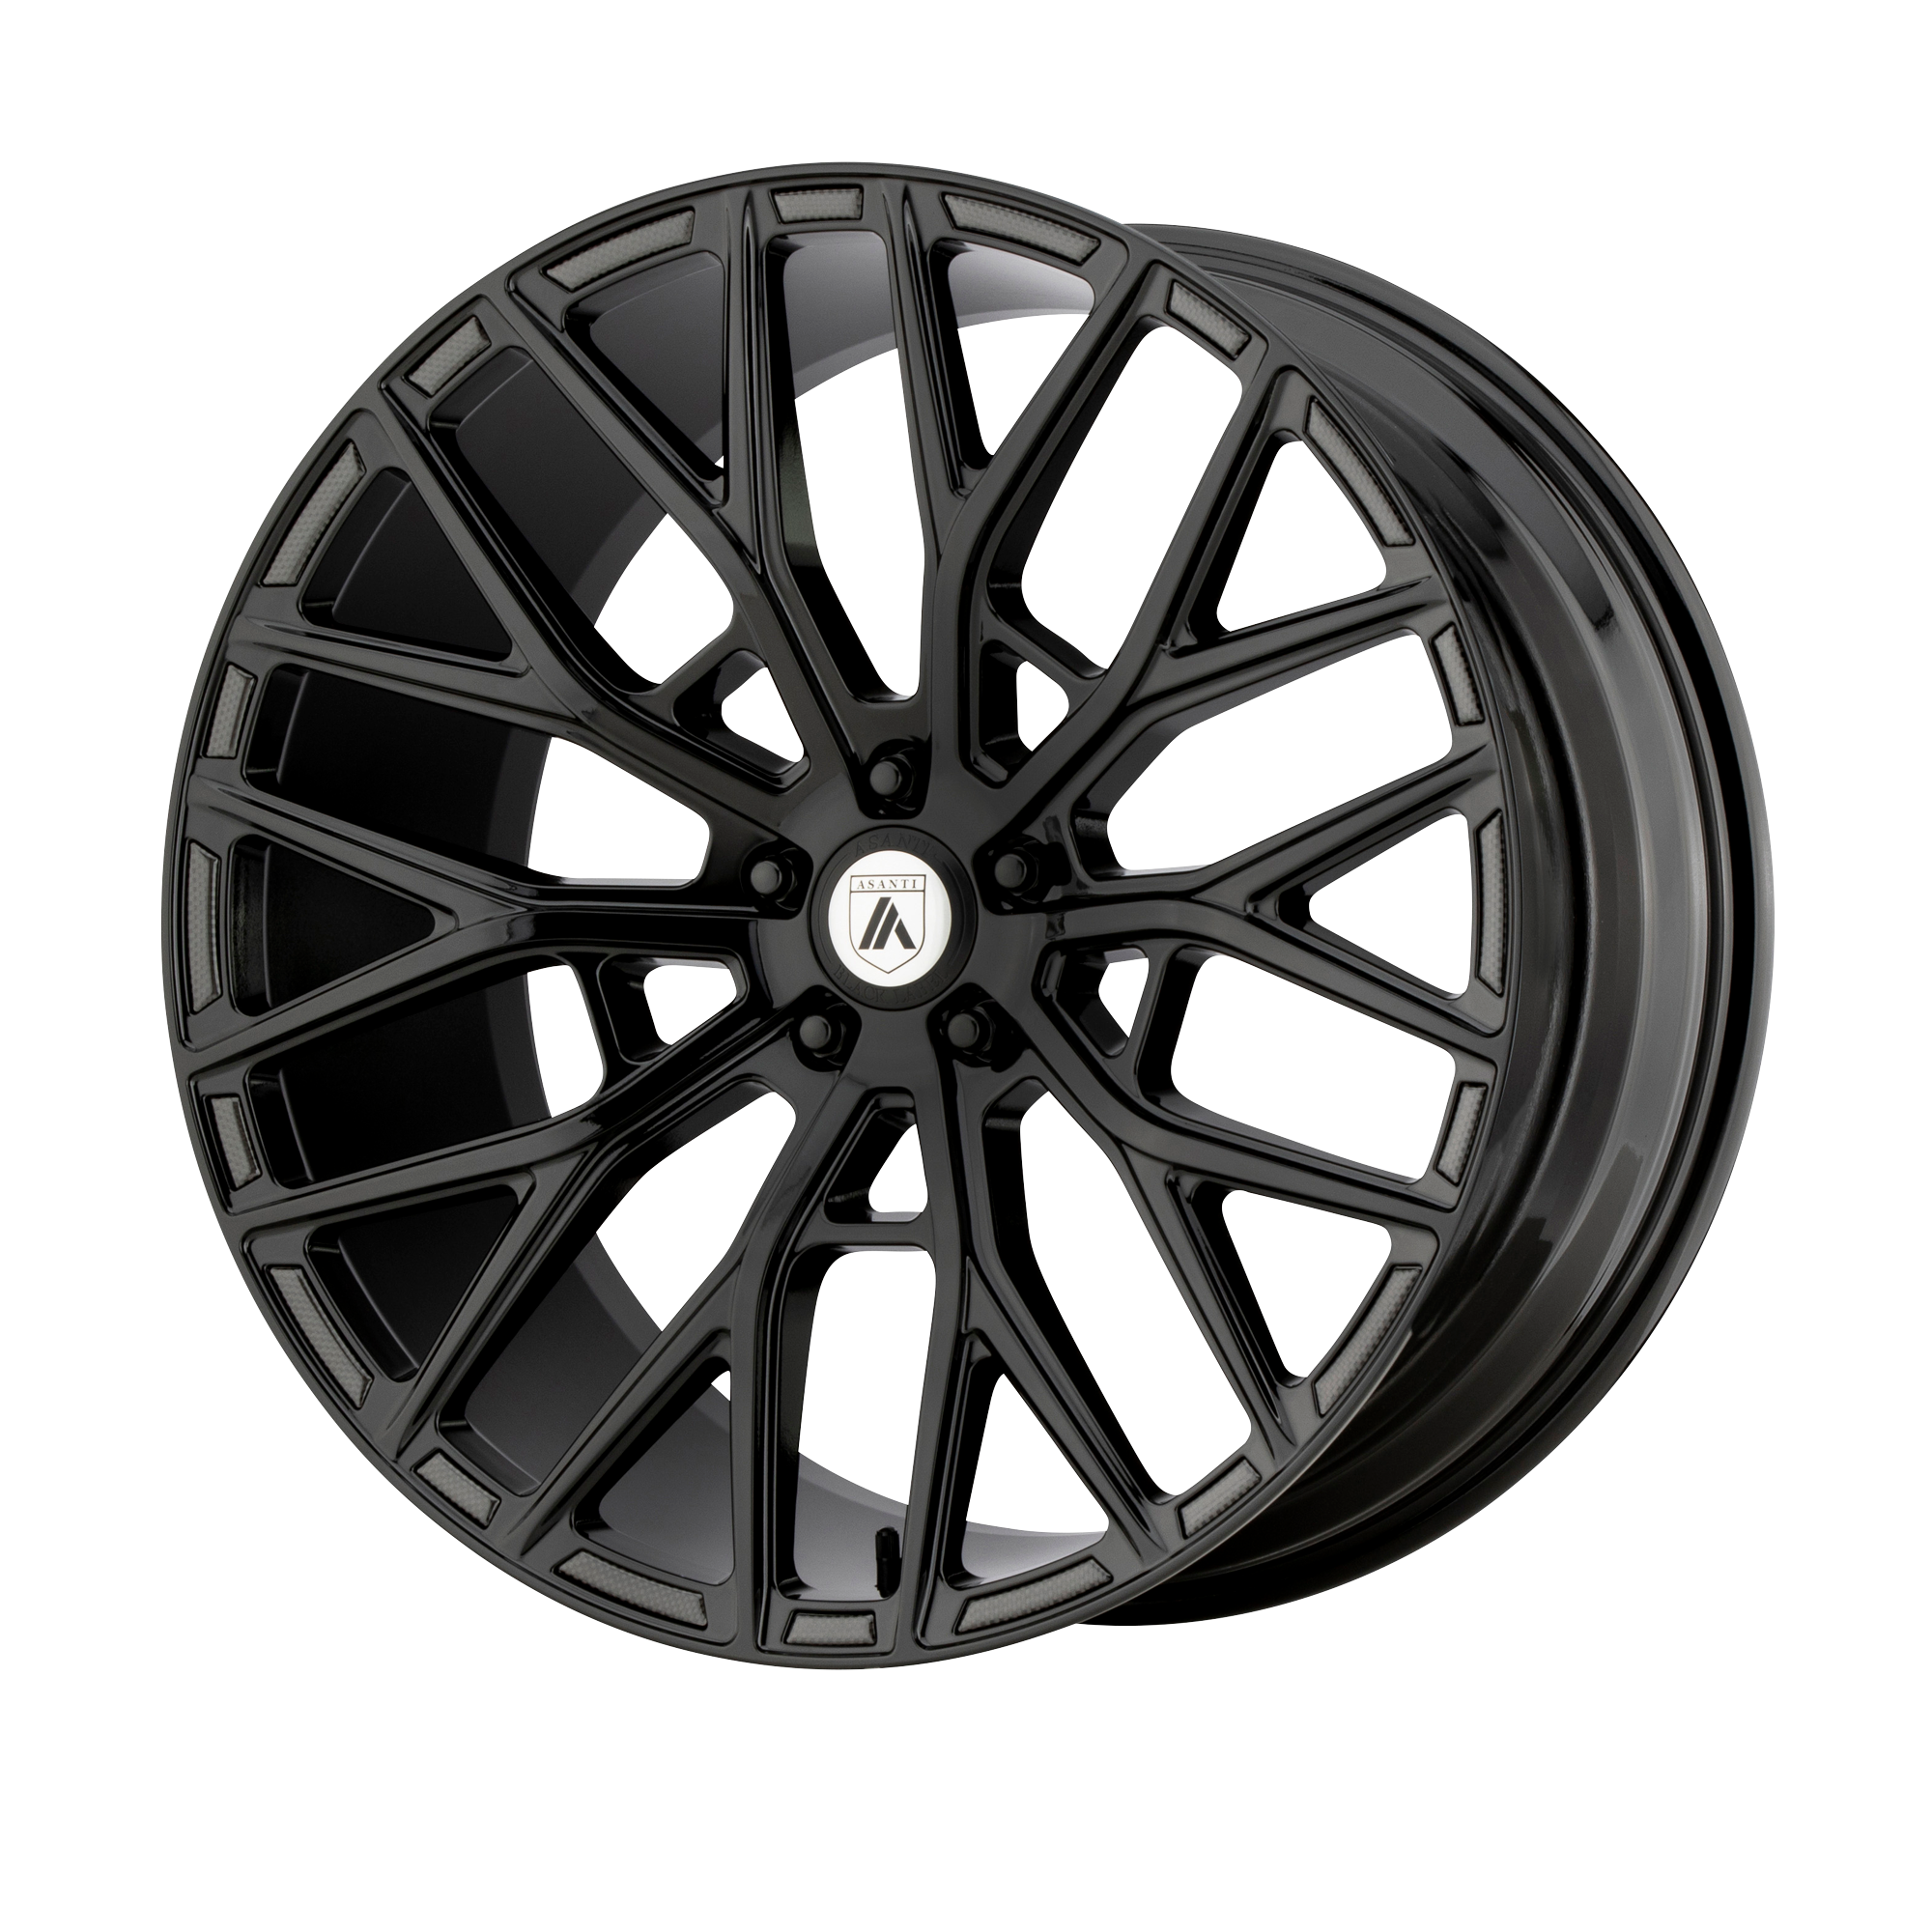 LEO 20x9 Blank GLOSS BLACK (35 mm) - Tires and Engine Performance